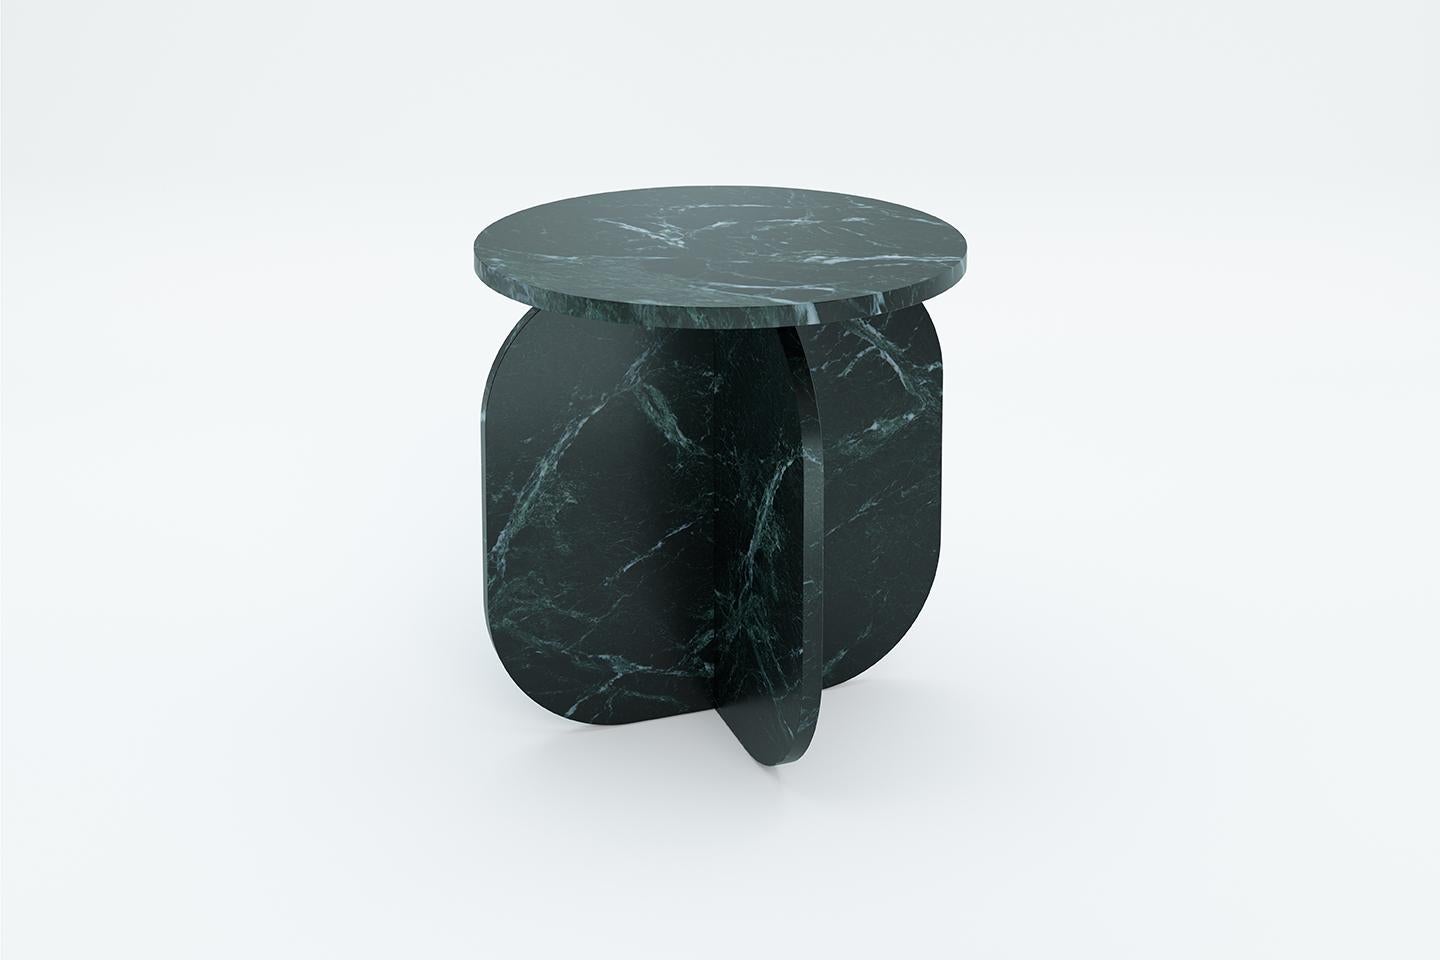 Nor Tall 50 Marble by Sebastian Scherer
Dimensions: D50 x W50 x H50 cm
Materials: Marble
Also Available: Marble (matt): Carrara Bianco (white) / Wild Forest (green) / Marron Emperador (brown) / Nero Marquina (black).
Custom heights + 50 %, other